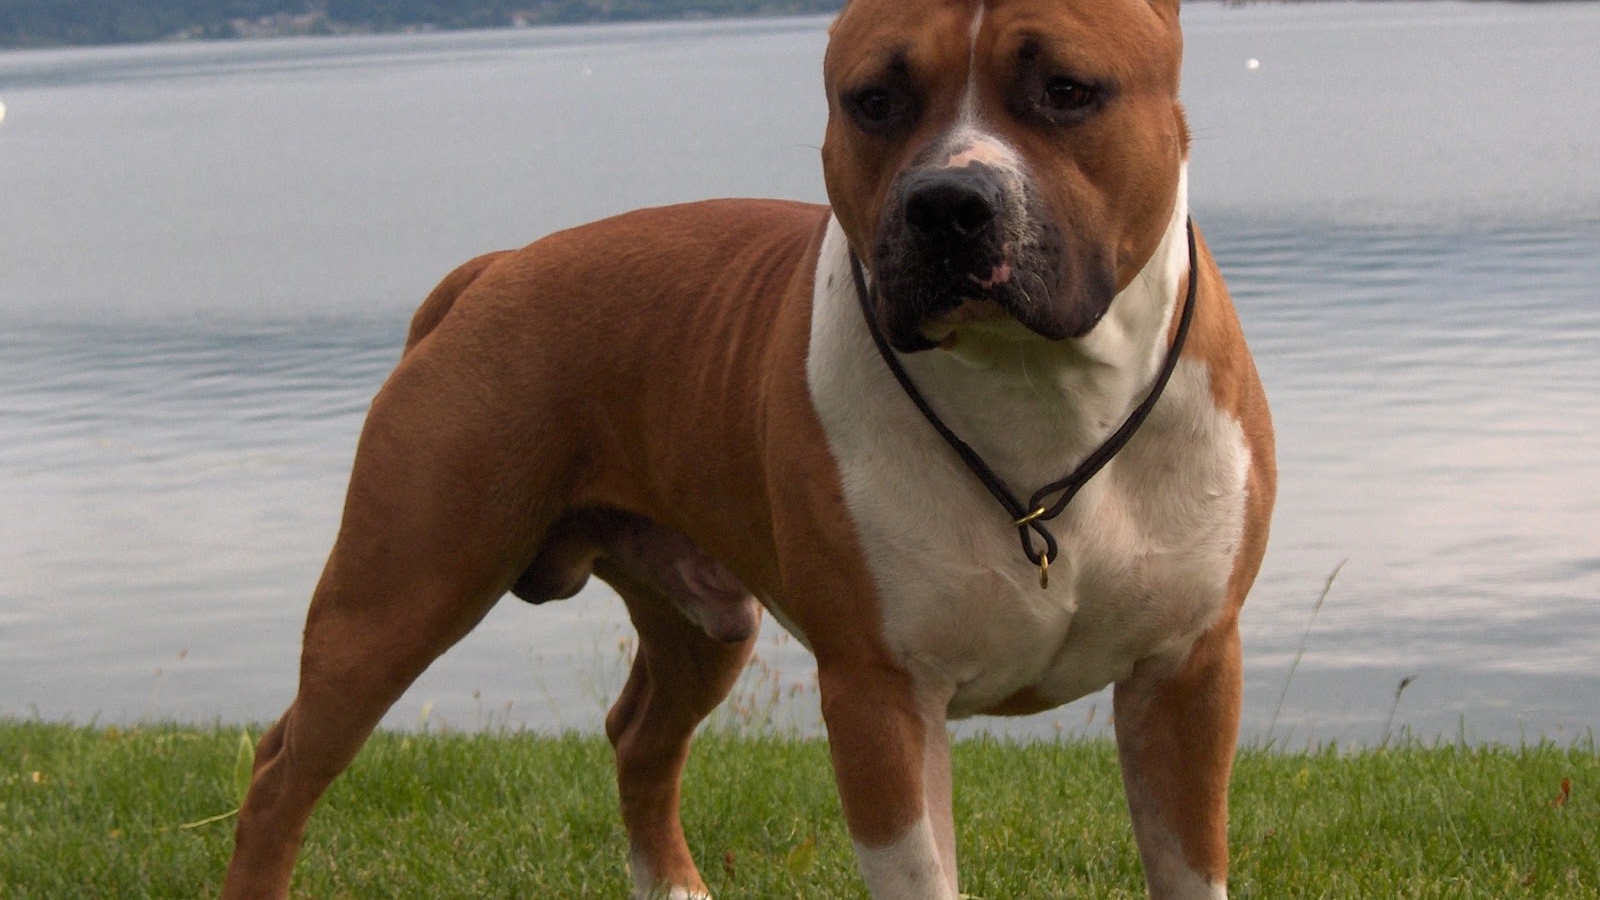 The Staffordshire Bull Terrier at the lake